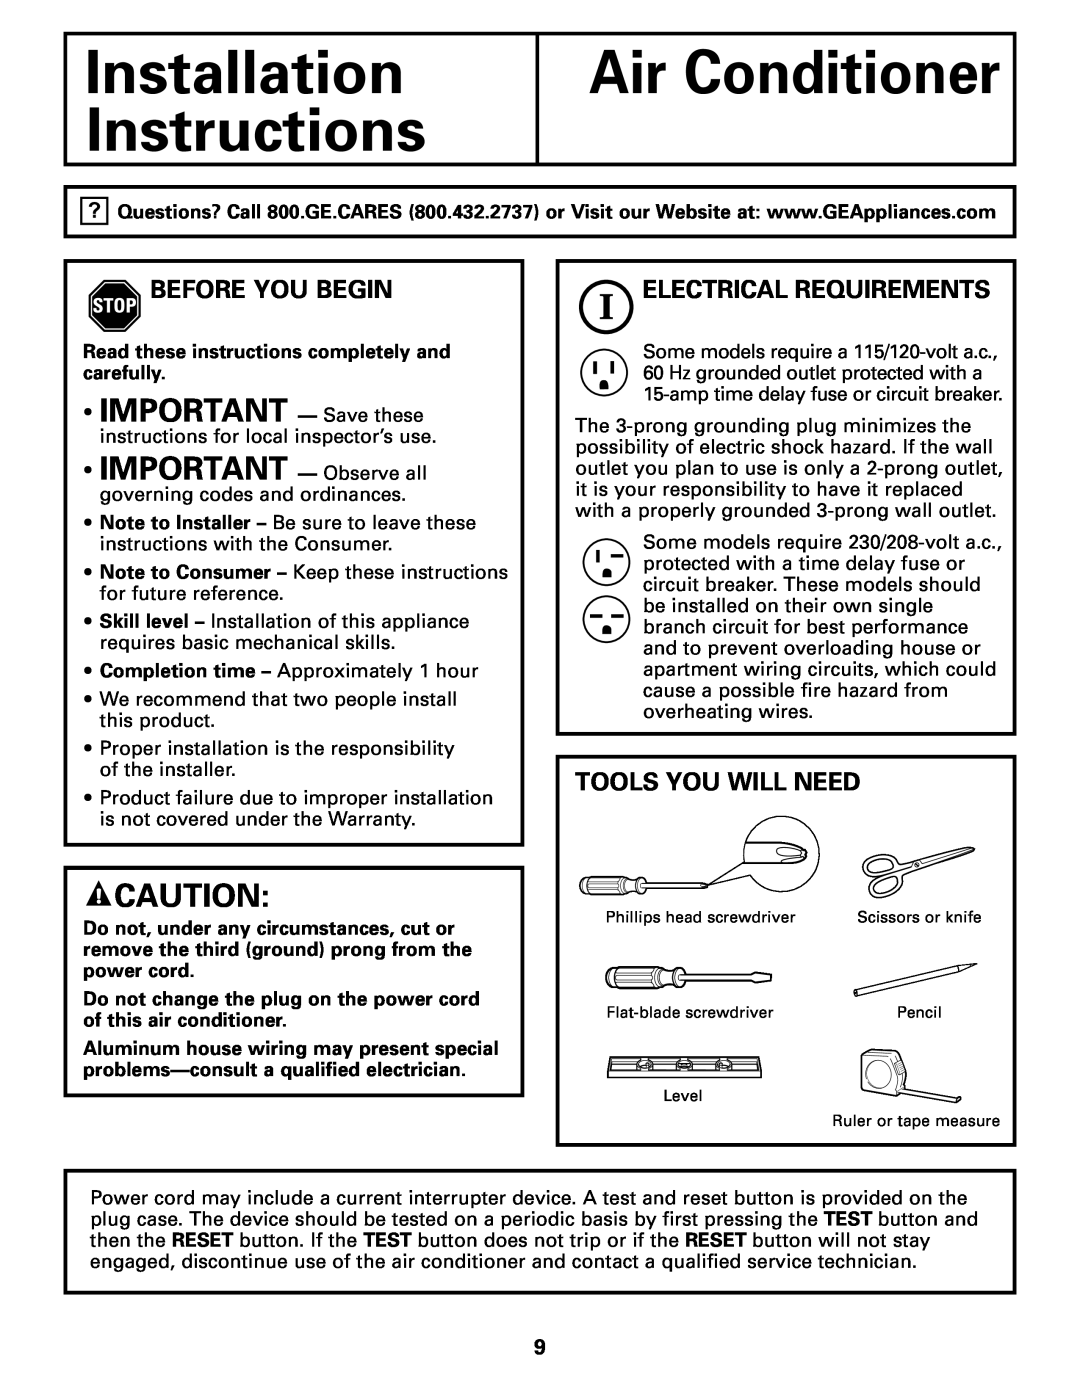 GE AGQ06 Installation Instructions, Air Conditioner, •IMPORTANT — Save these, Before You Begin, Electrical Requirements 